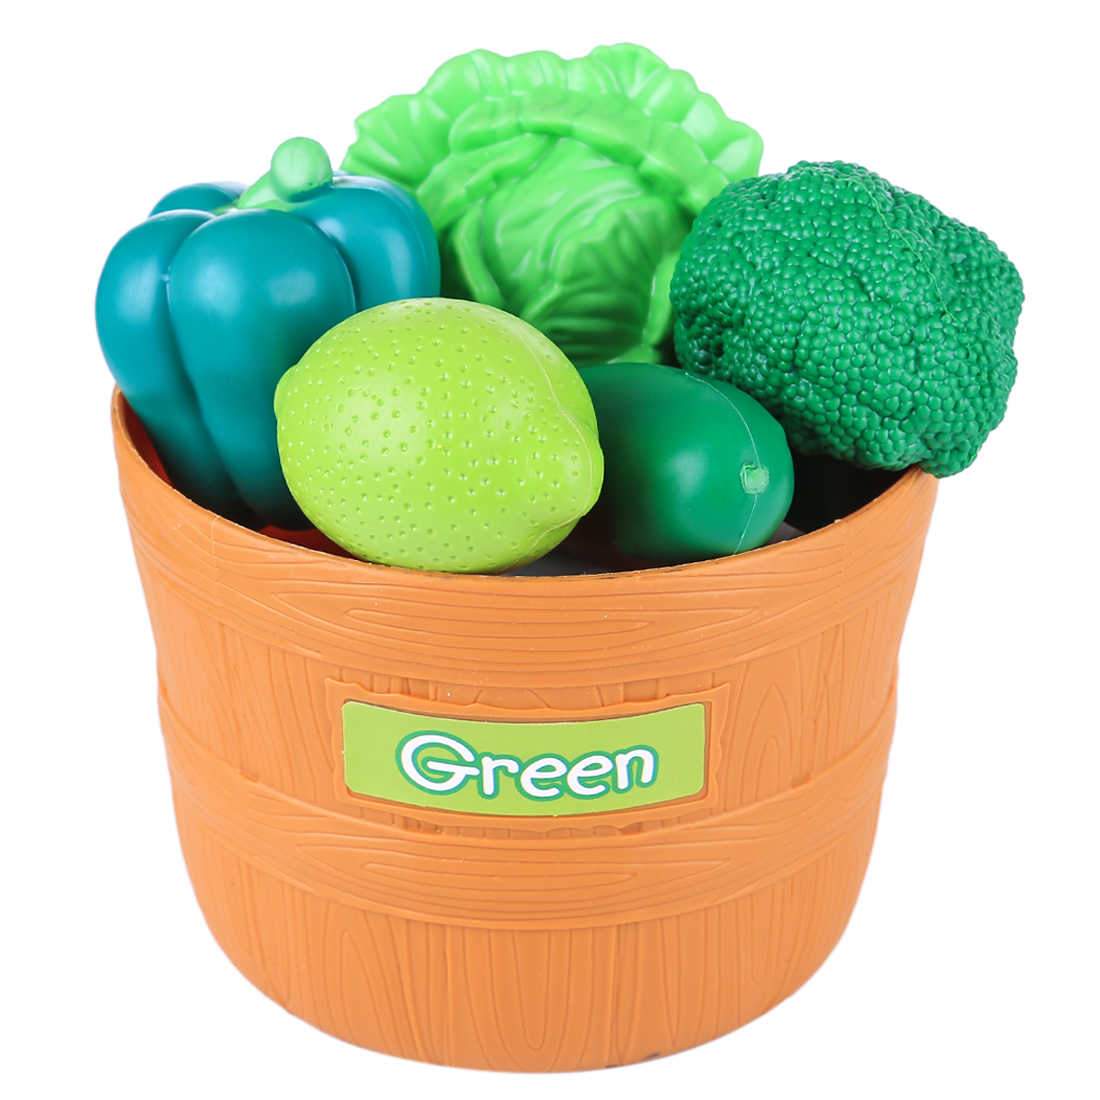 Children Pretend Play Fruits And Vegetables Playset Pre-School Learning Educational Toys Creative Cognition For Kids